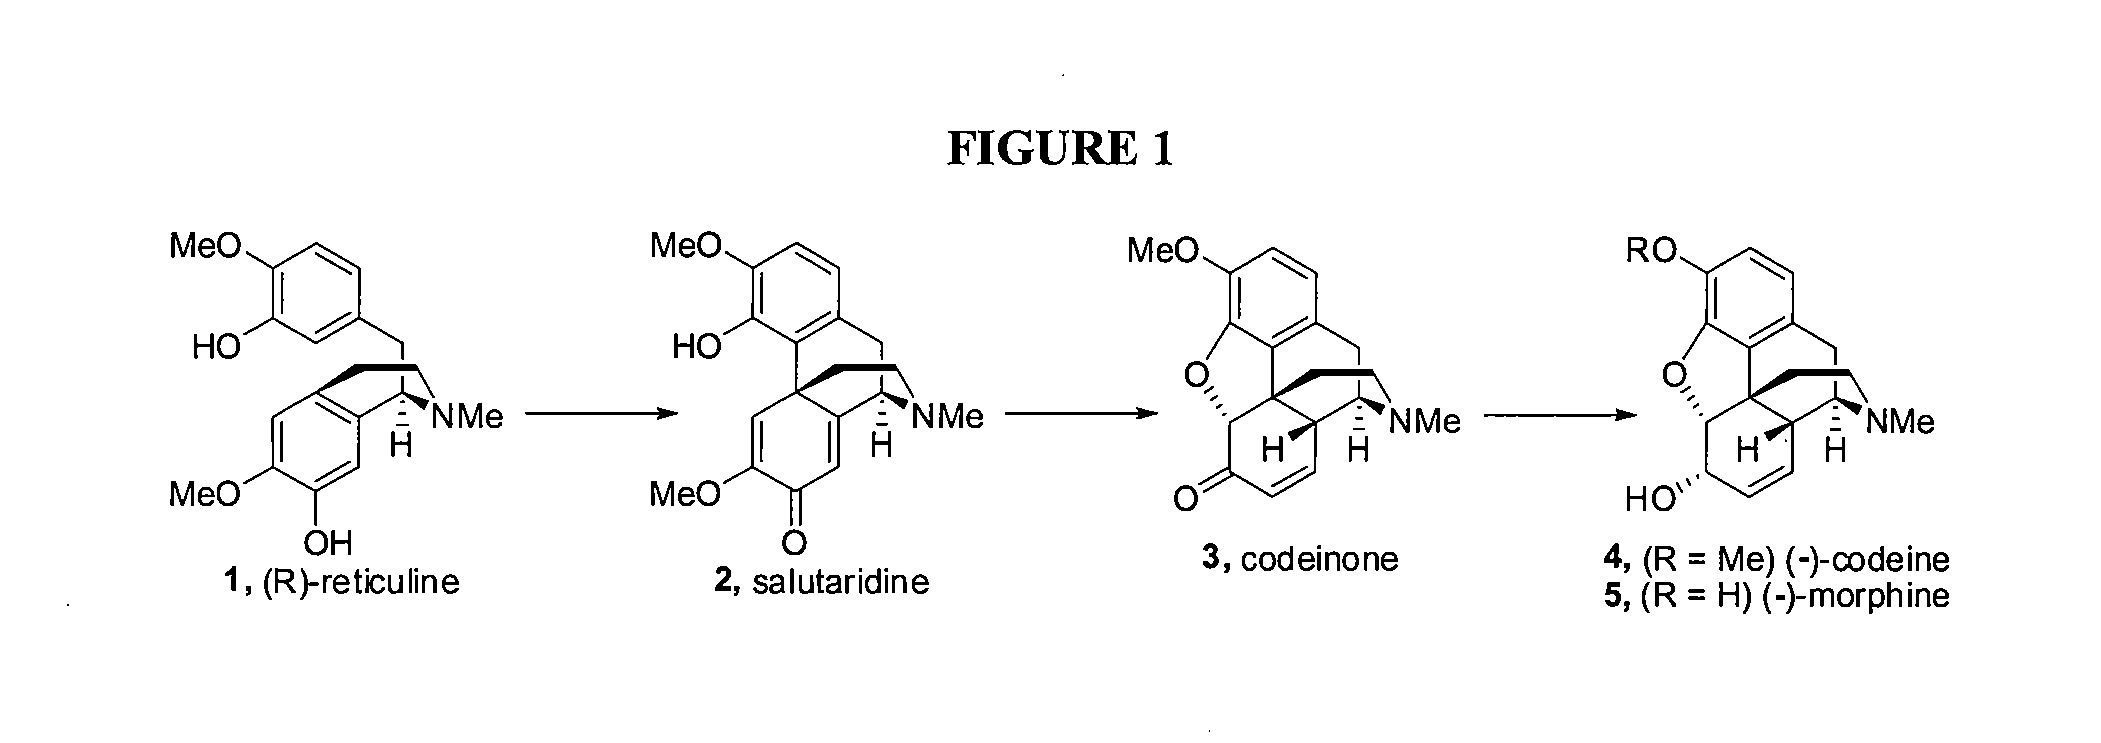 Efficient Synthesis Of Morphine And Codeine